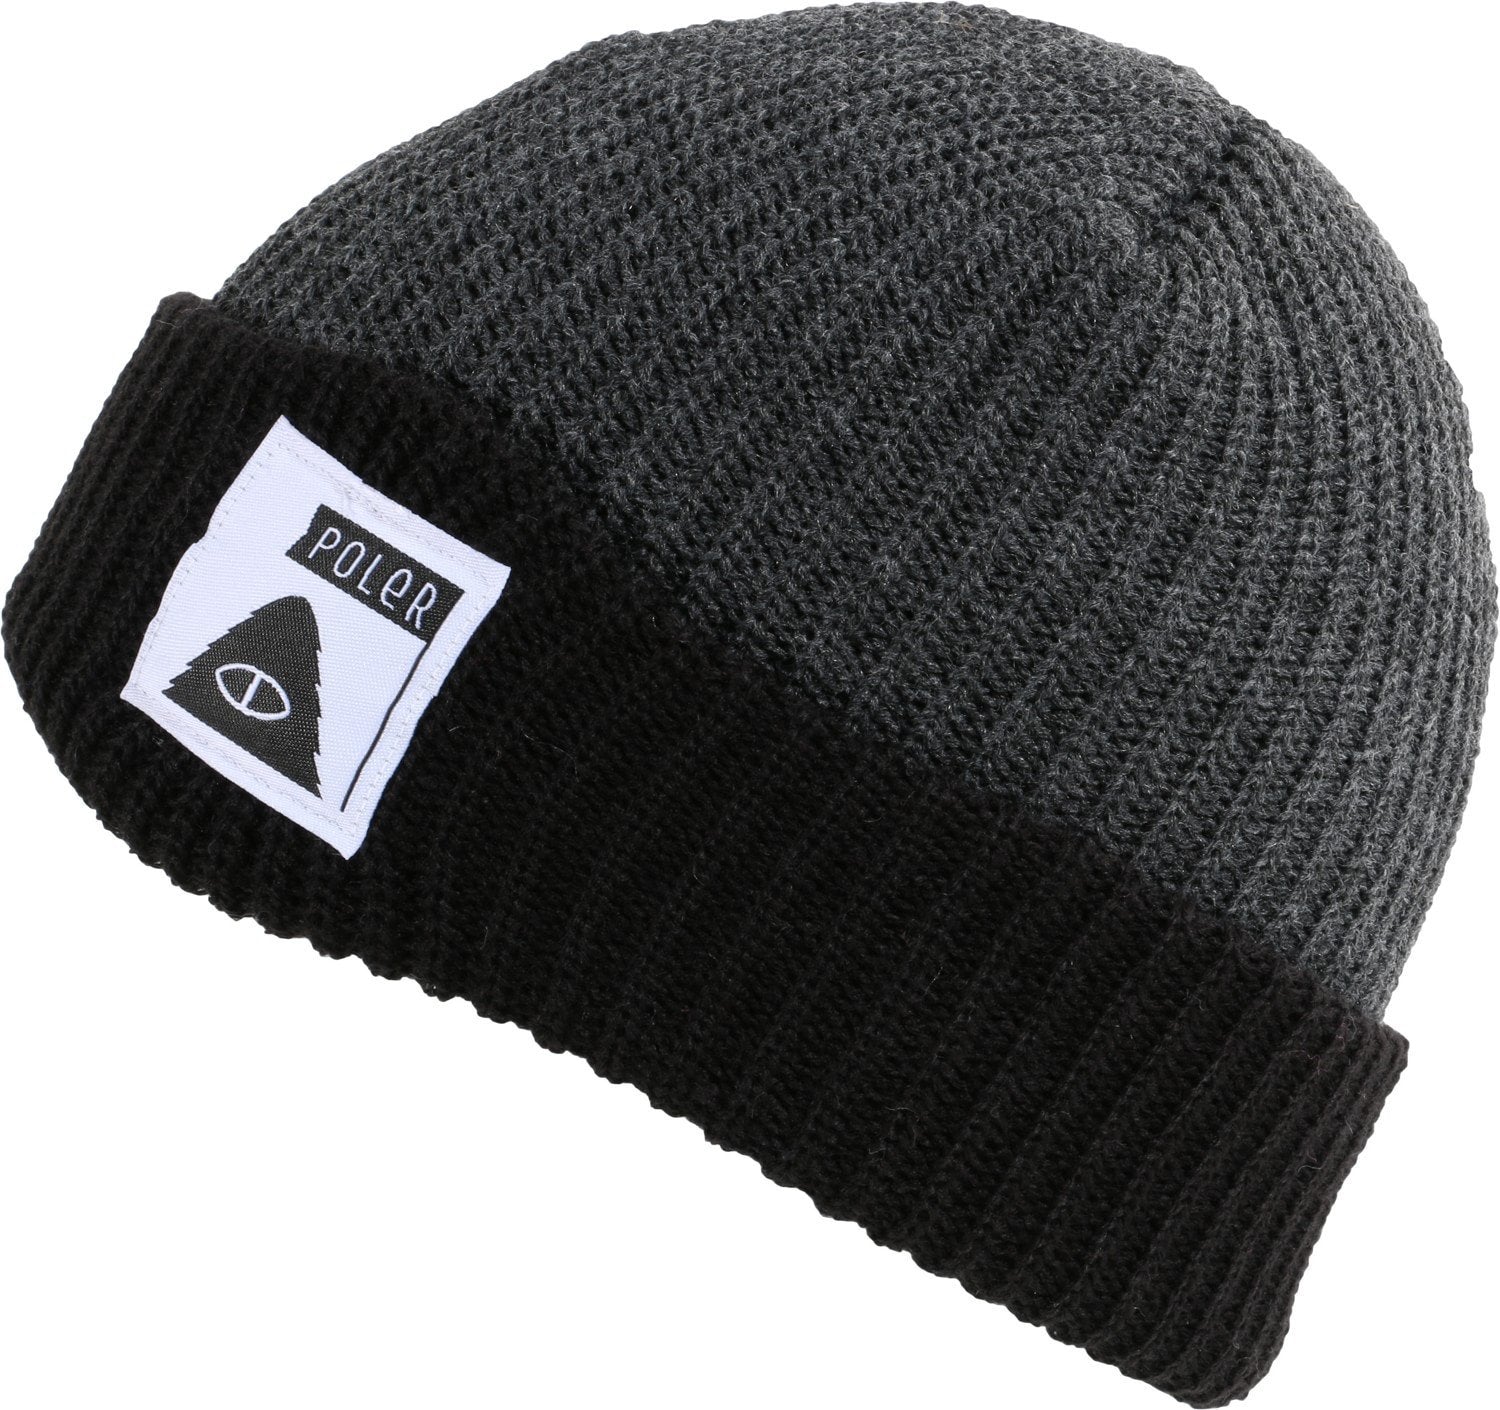 POLER TRAILBOSS BEANIE // CHARCOAL HEATHER-The Collateral